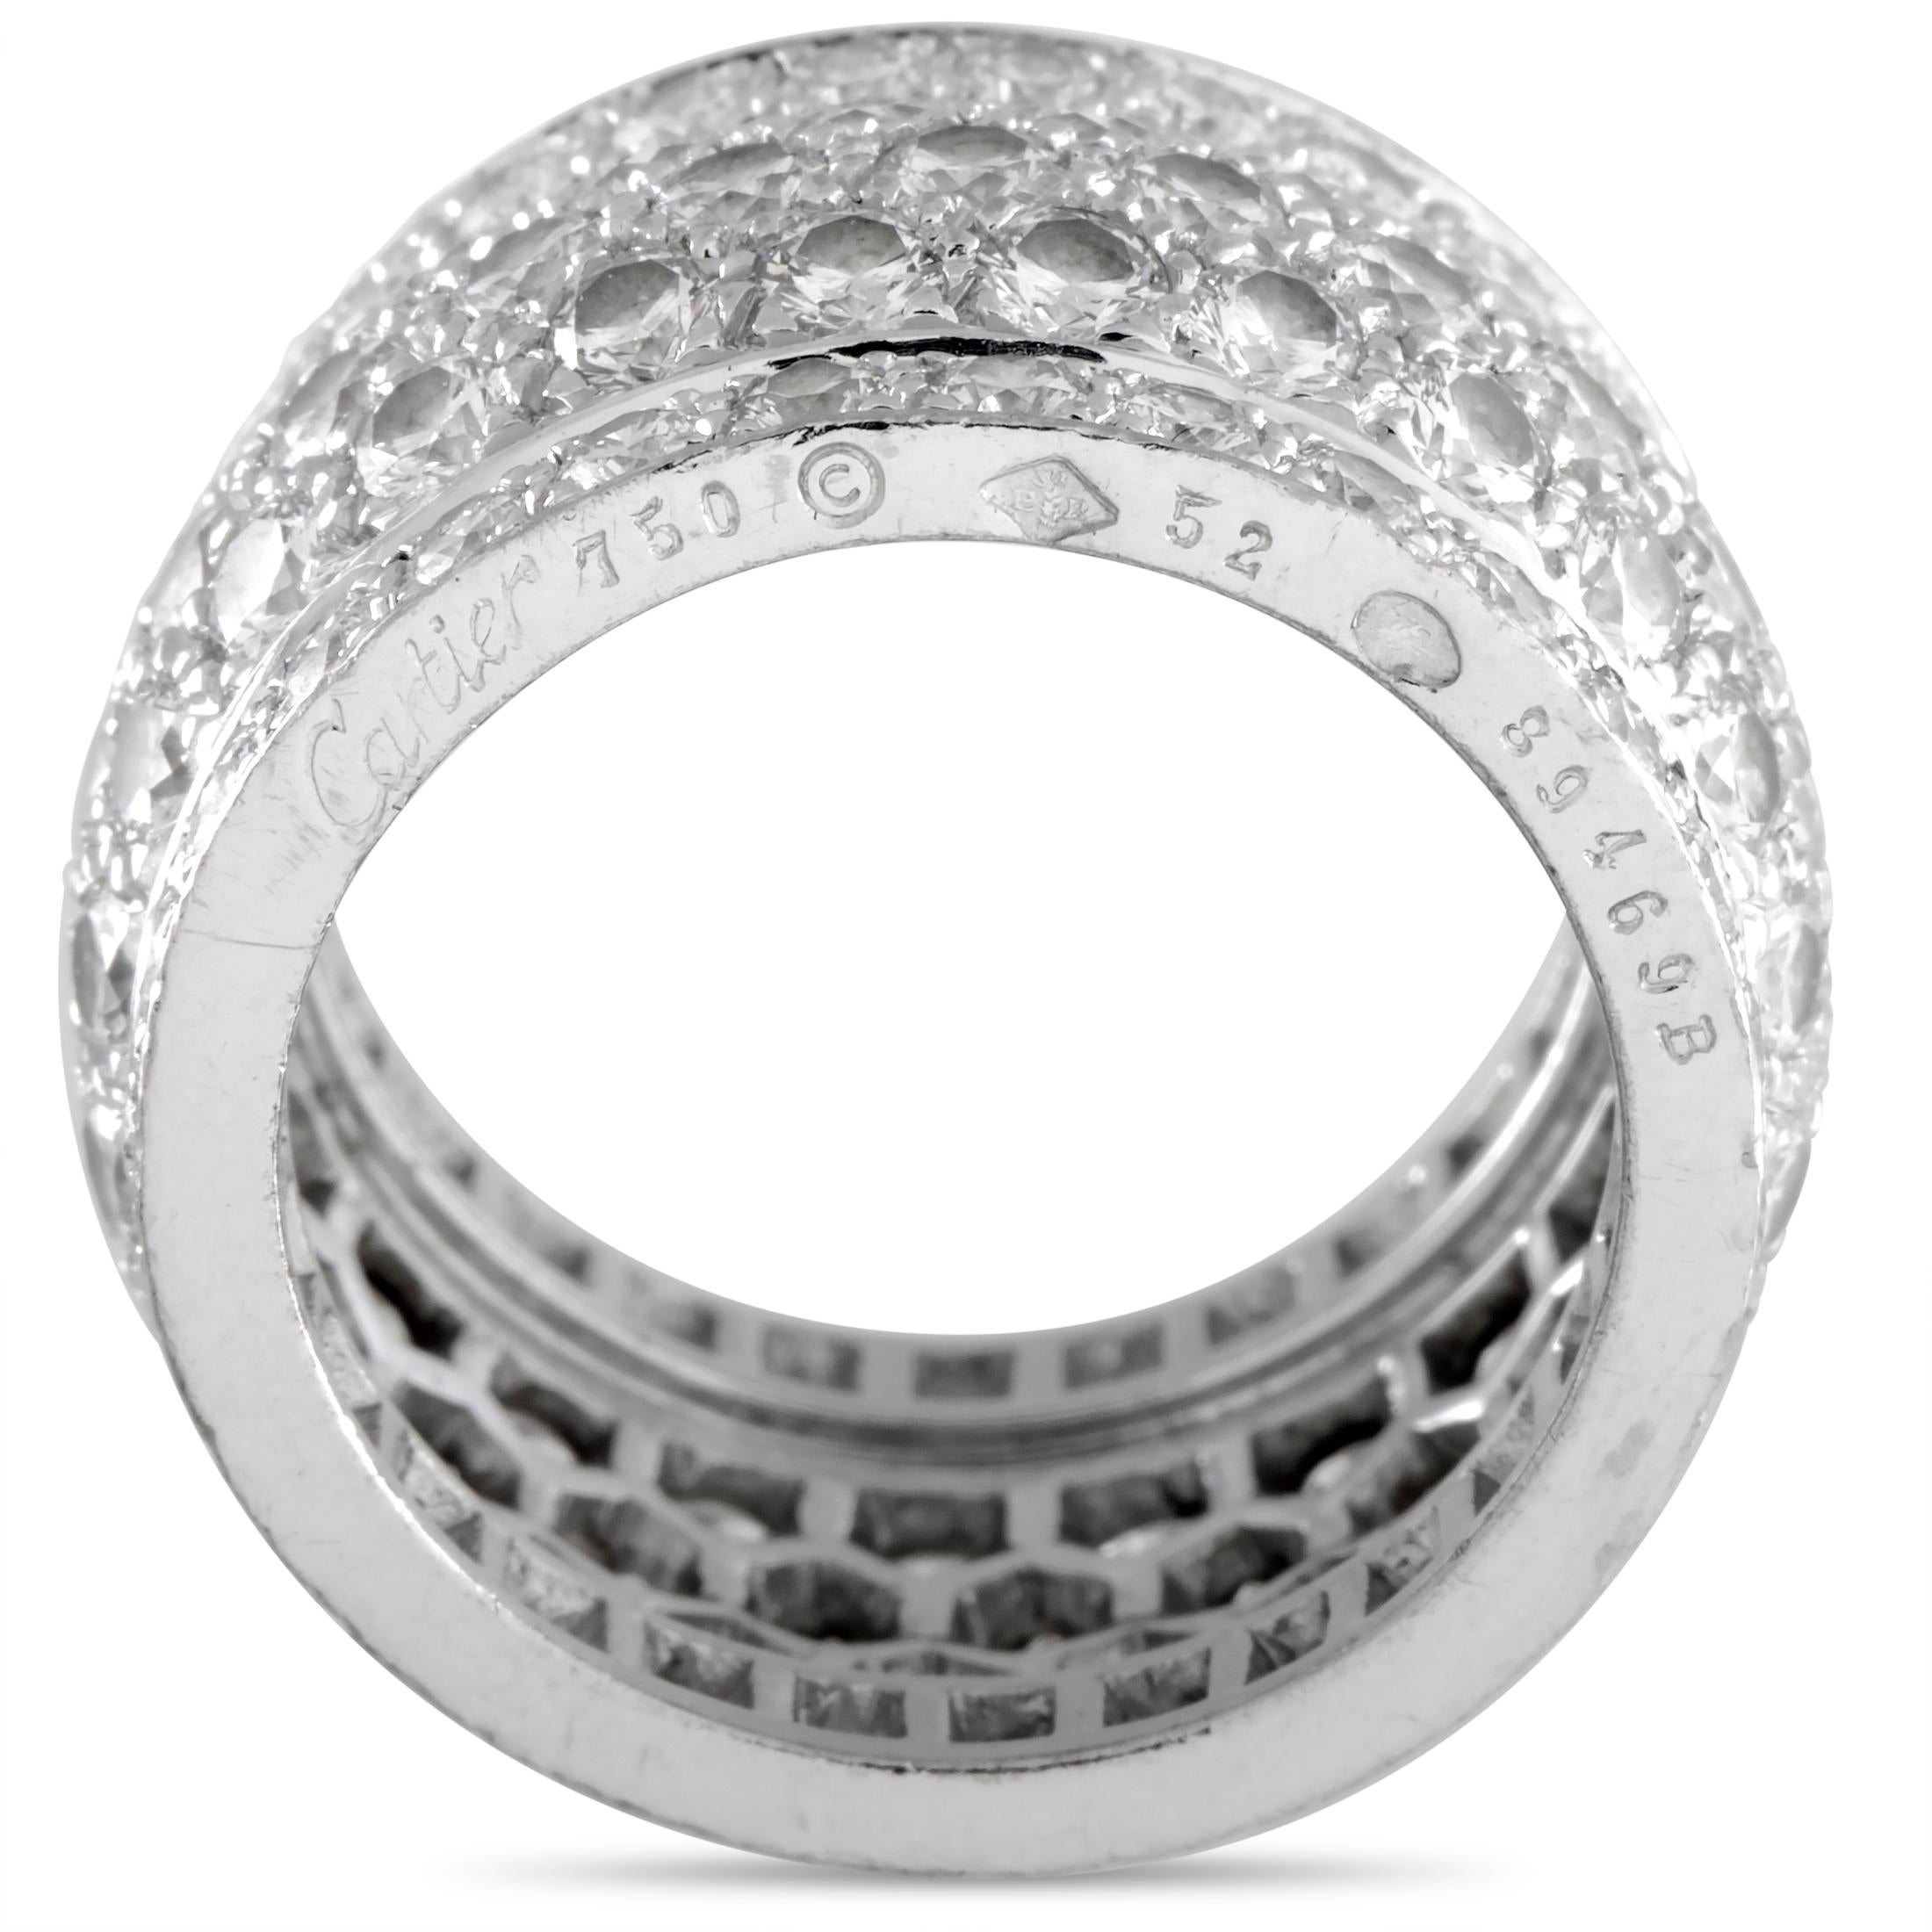 The Cartier “Nigeria” ring is made out of 18K white gold and diamonds that amount to approximately 5.00 carats. The ring weighs 11.4 grams and boasts band thickness of 12 mm and top height of 3 mm, while top dimensions measure 12 by 22 mm.

This